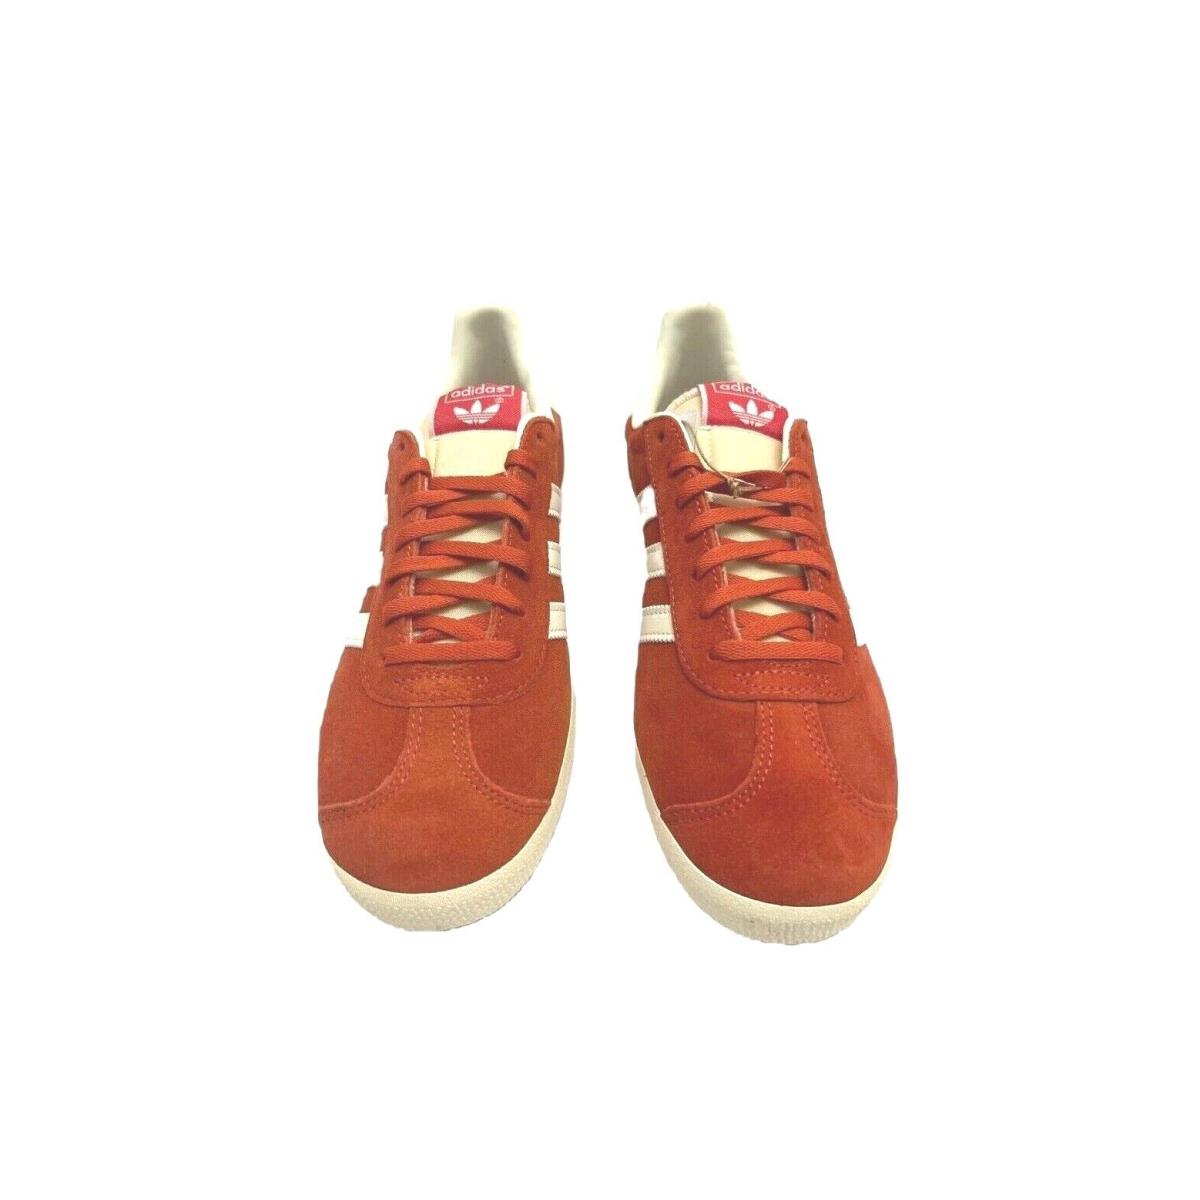 Adidas Men`s Gazelle Activewear/casual Shoes - Preloved Red/Off White/Cream White